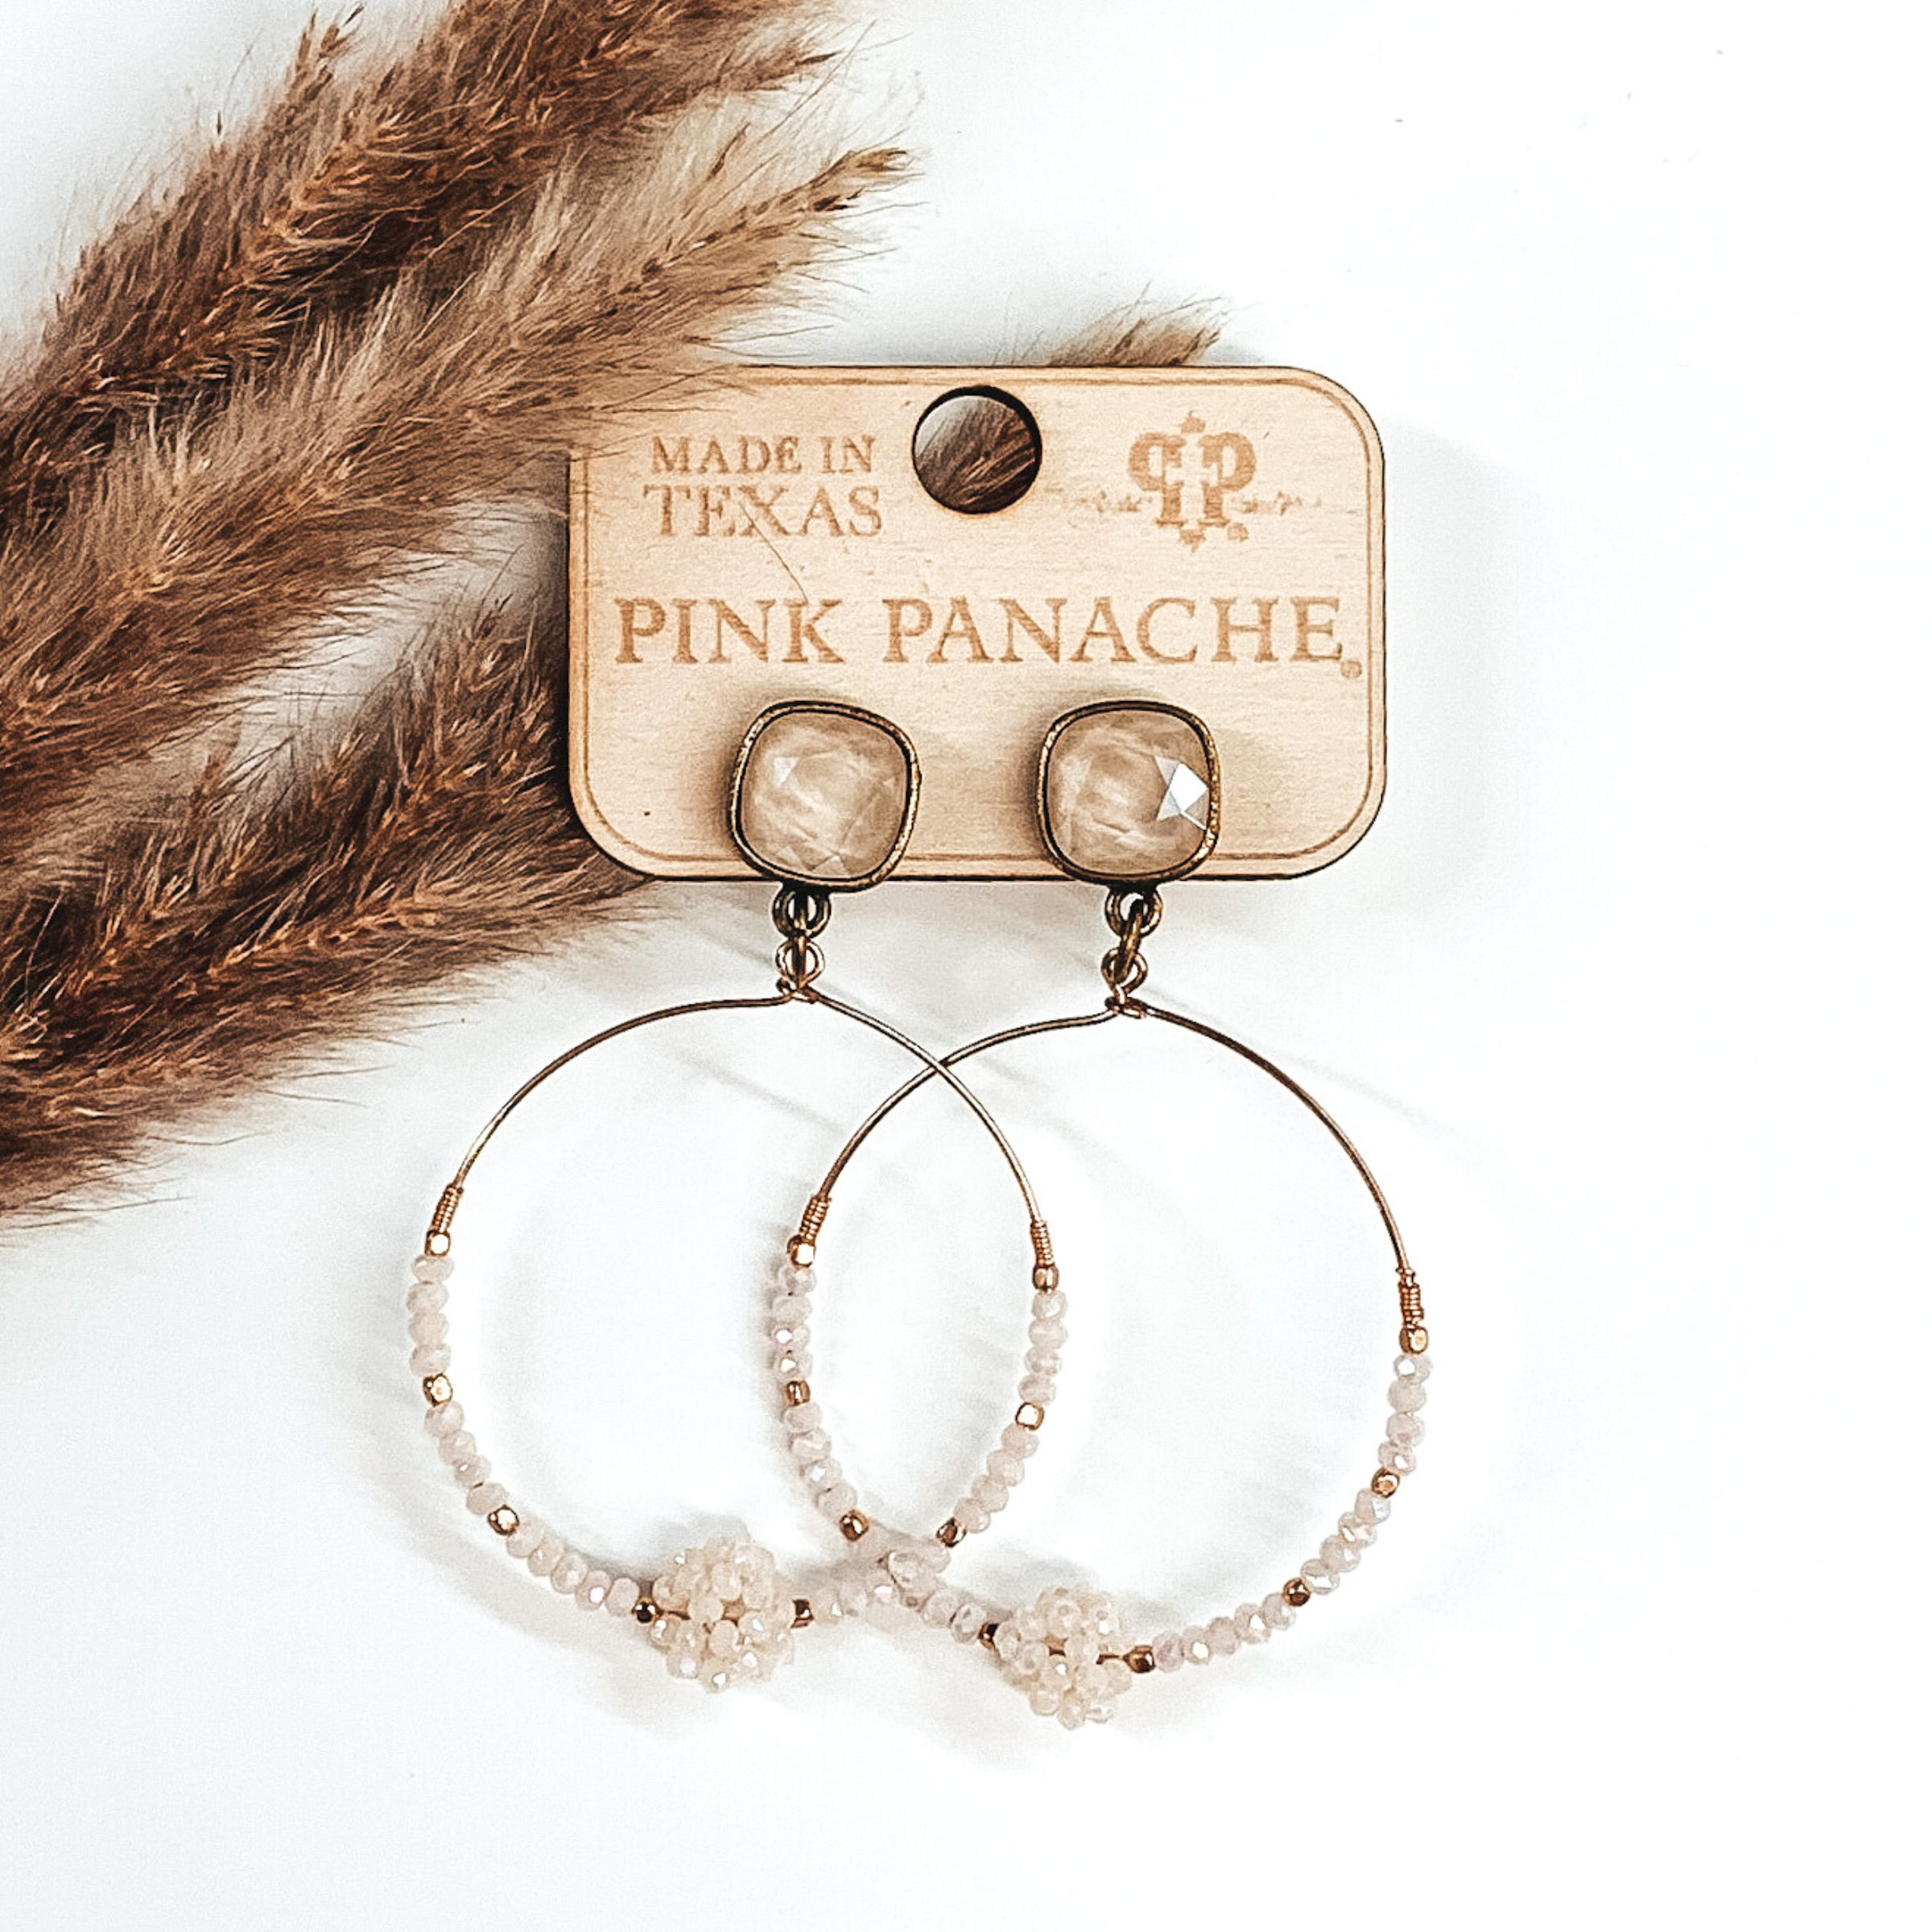 Pink Panache | Ivory and Gold Beaded Knot Hoop Earrings with Cushion Cut Crystals in Ivory - Giddy Up Glamour Boutique